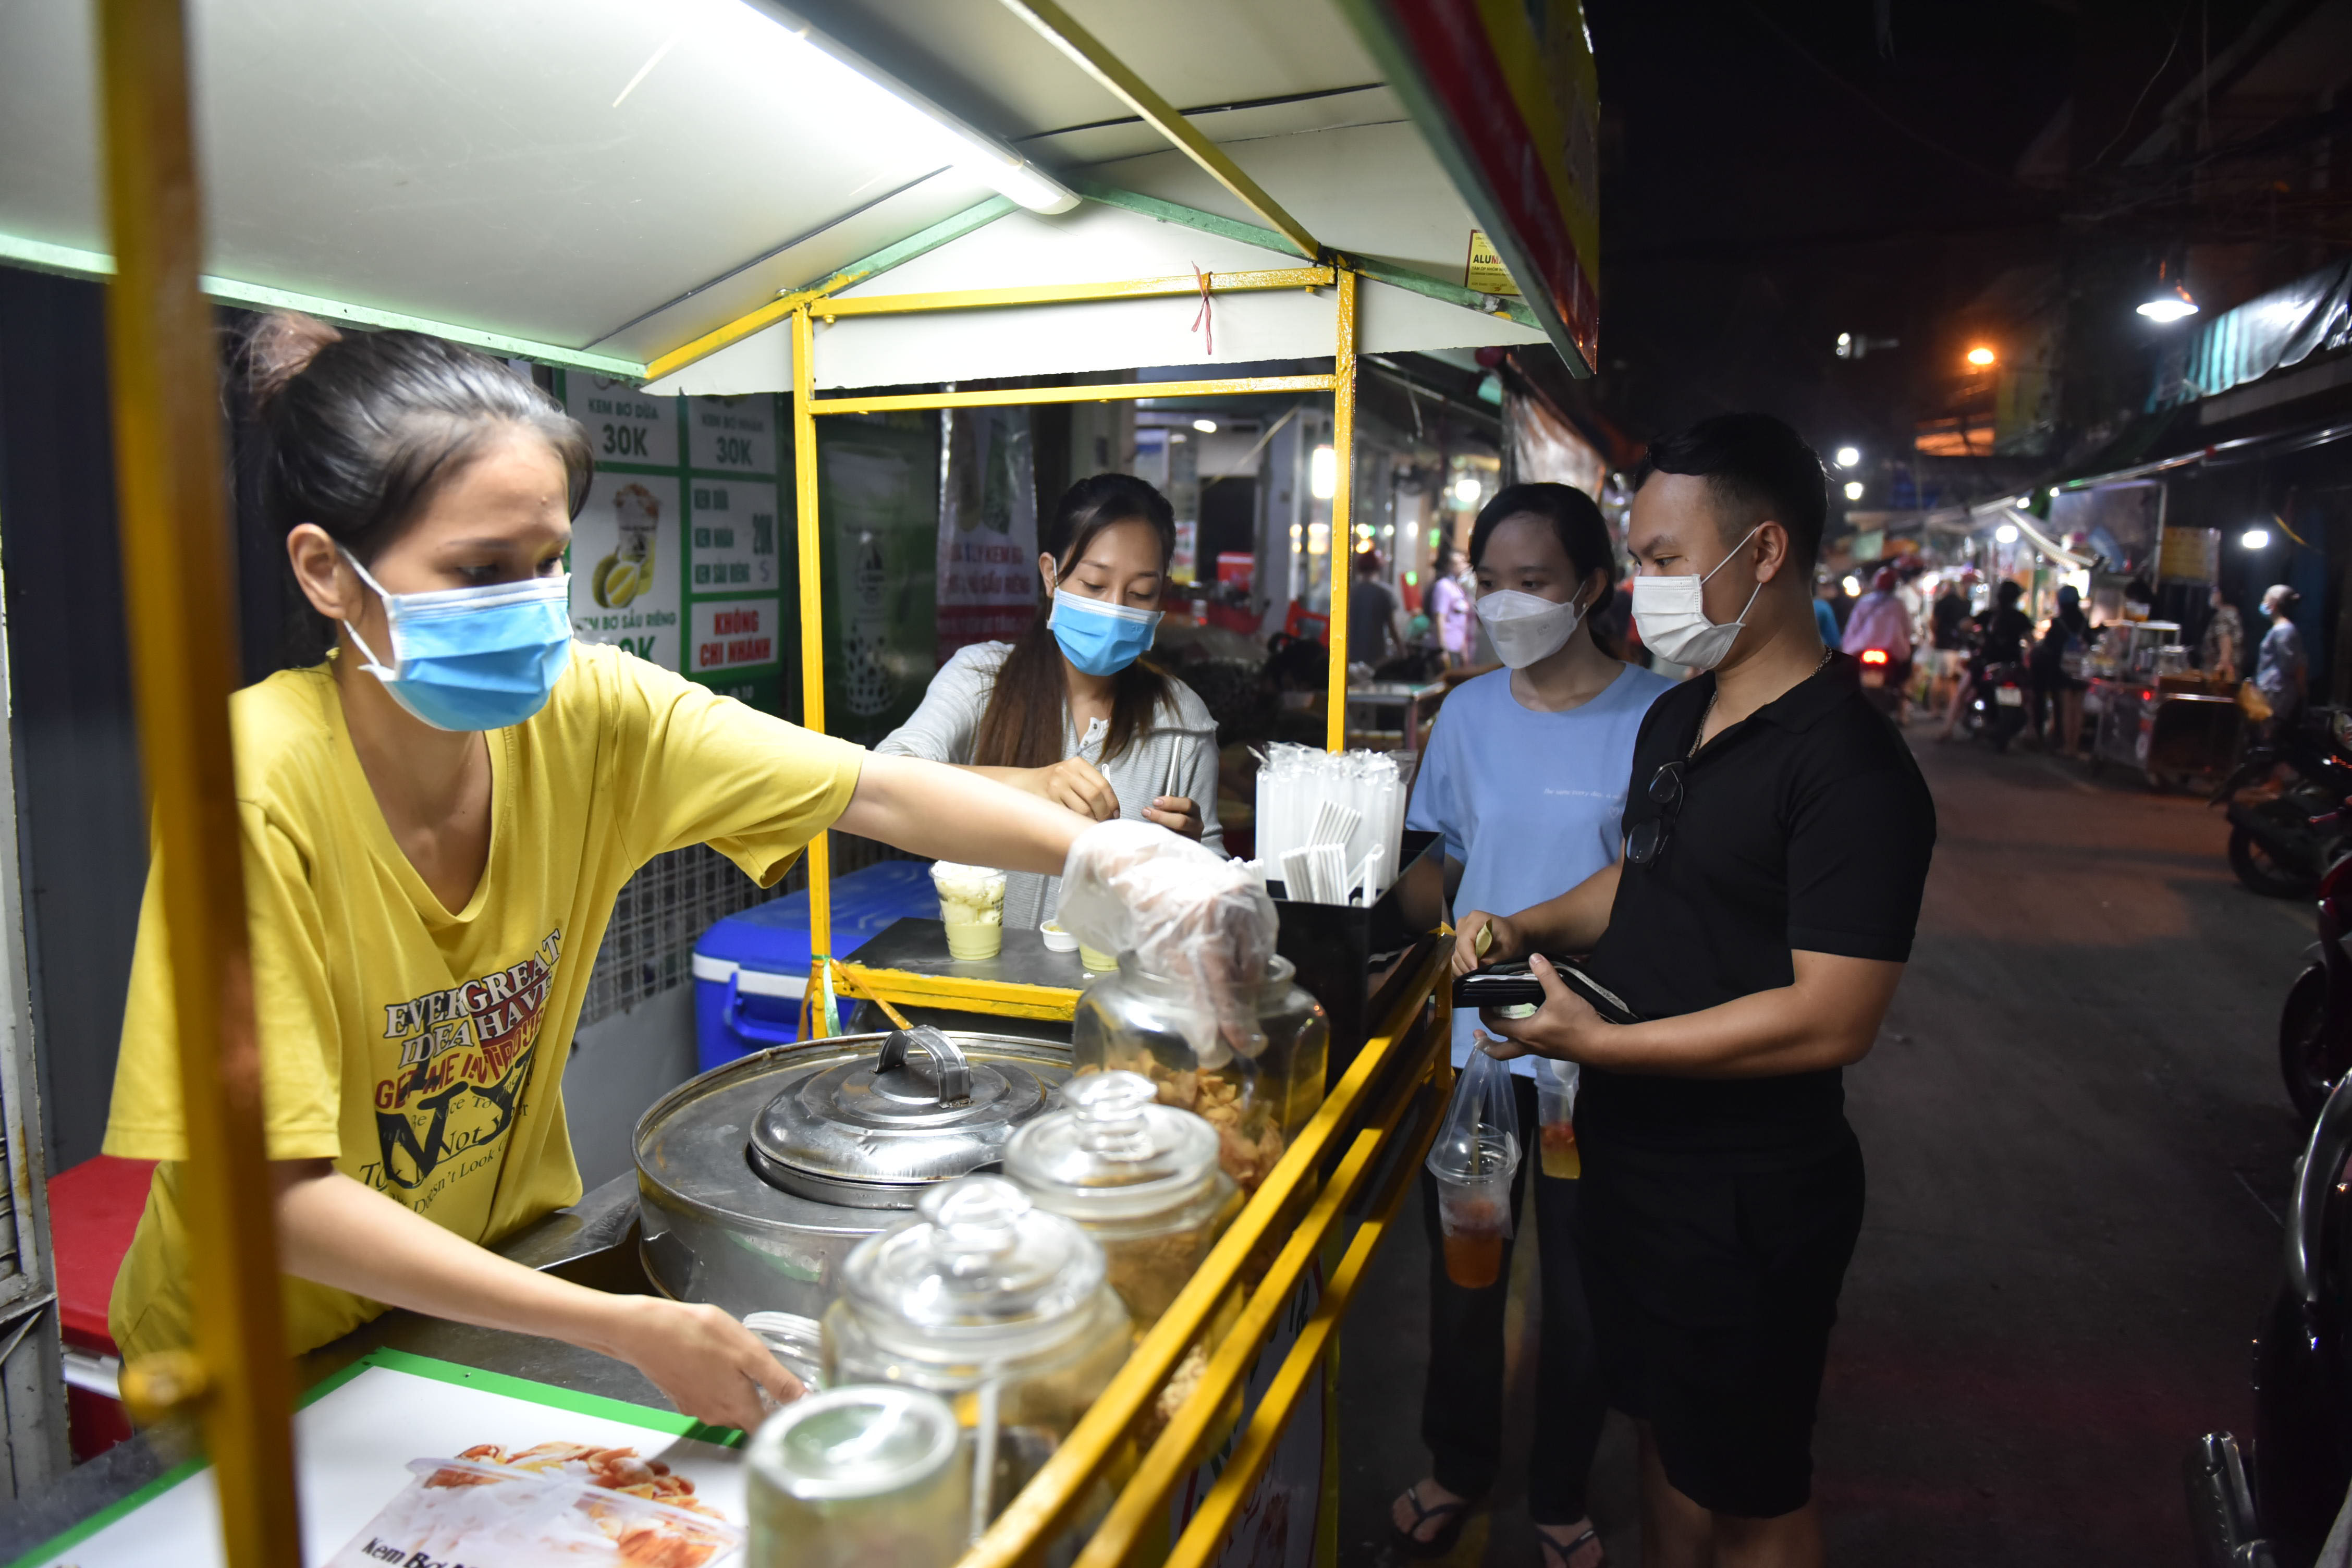 Customers are waiting for their dessert at an ice-cream stall at Ho Thi Ky Food Street in Ho Chi Minh City’s District 10 on October 19, 2021. Photo: Ngoc Phuong / Tuoi Tre